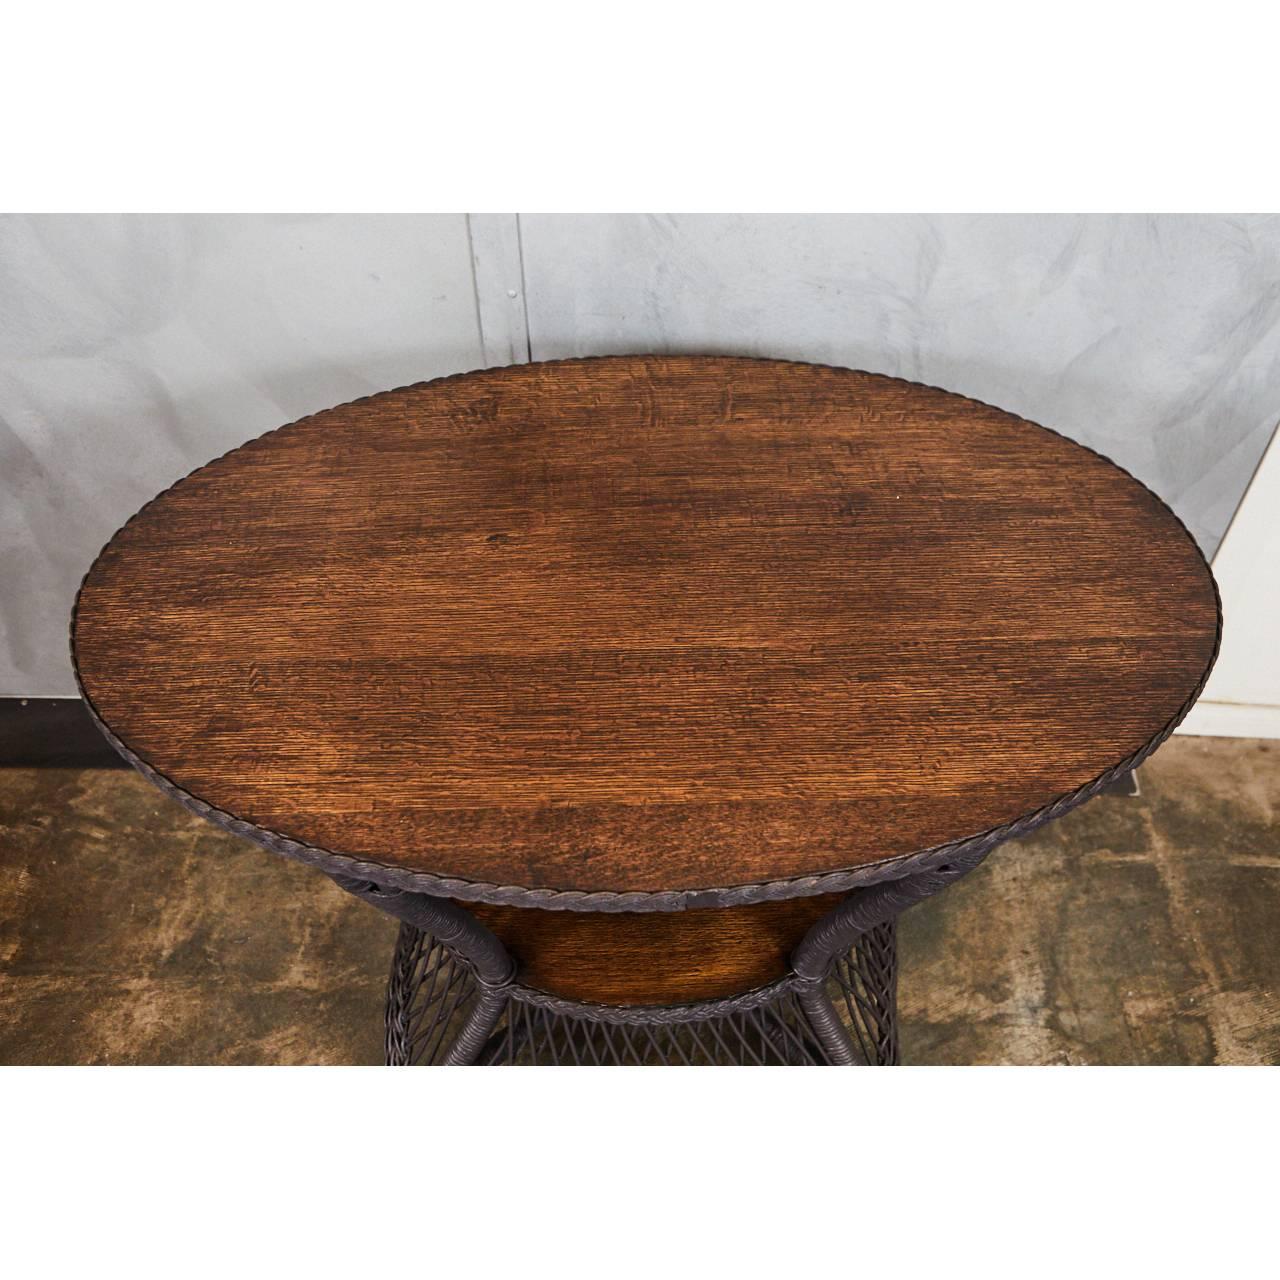 This 1930s table has an oval oak top and bentwood construction. The piece has been recently painted with farrow and ball brand paint in an ash brown color. The table has original brass tips on the feet.



 